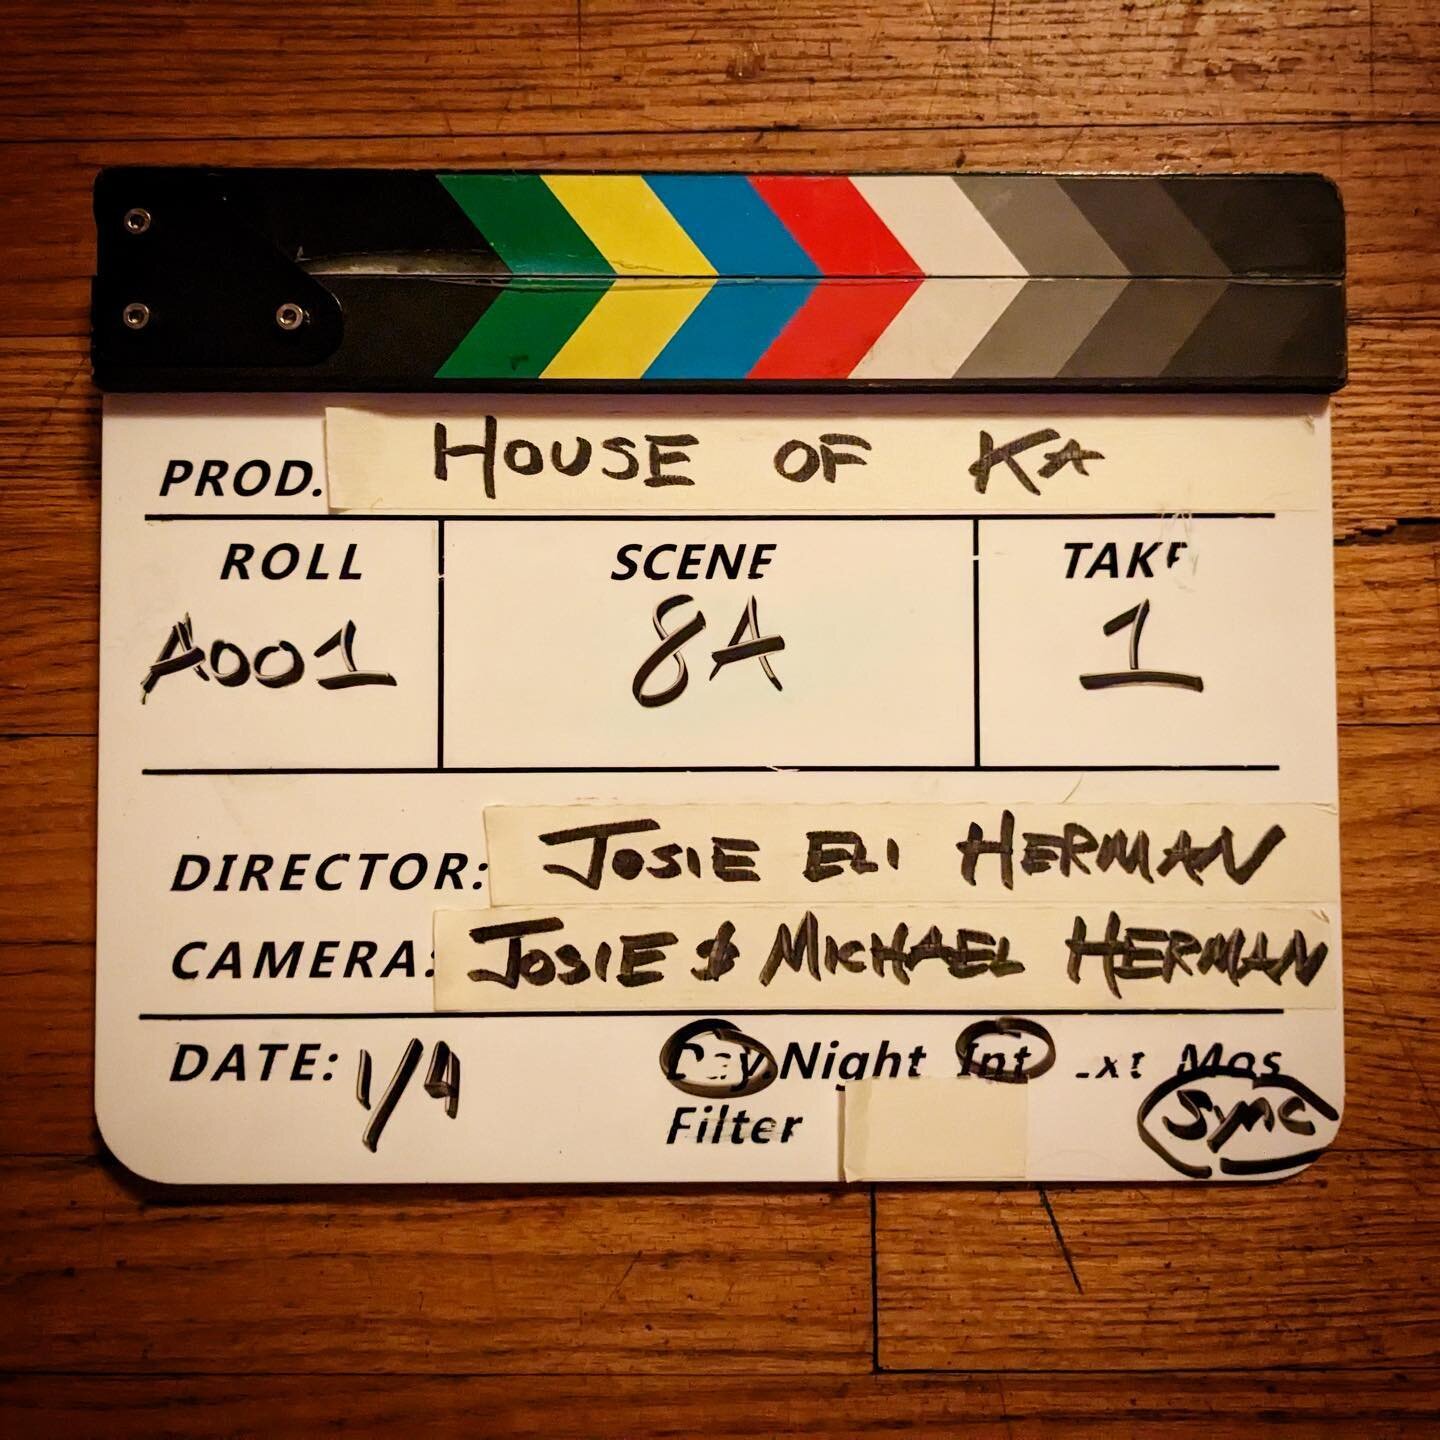 Ka-n you believe it?! Filming for @houseofkamovie has wrapped! 🎬 A huge thank you to the cast and crew for all the hard work! Stay tuned! 🍿
.
.
.
#houseofka #hippogryphfilms #thatsawrap #cut #lonelyspectreproductions #acornartsandentertainment #fea